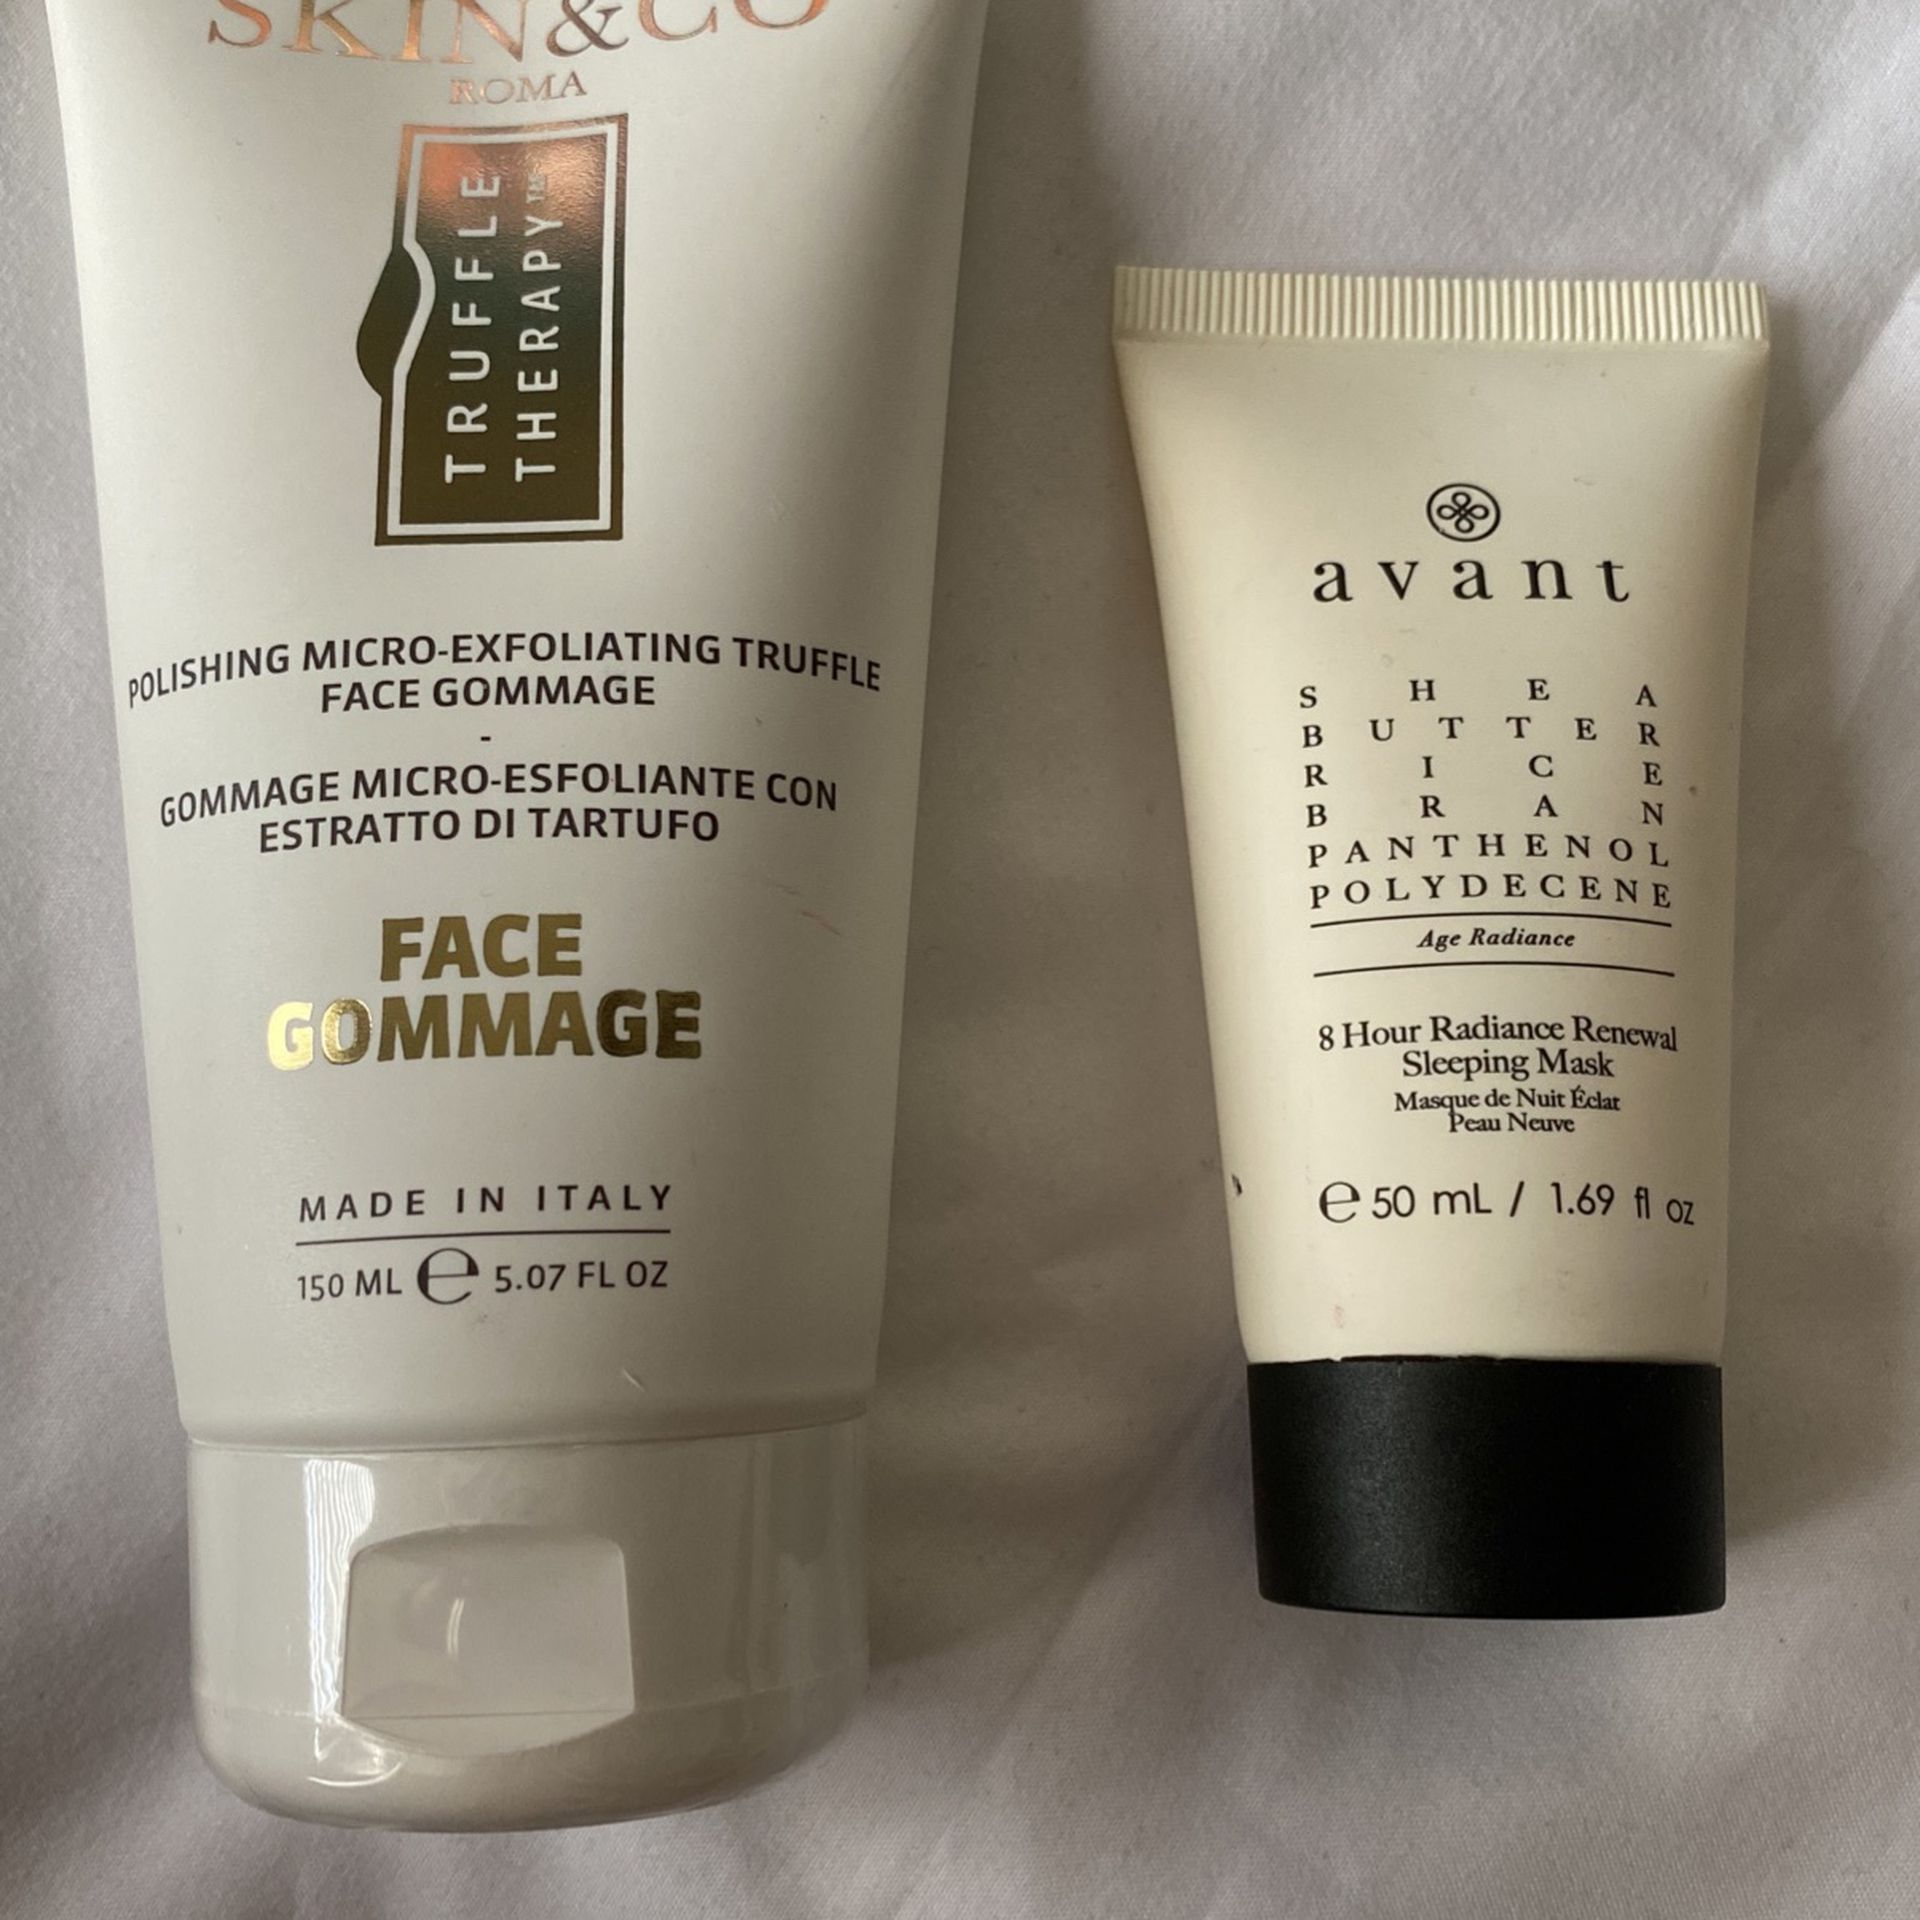 Skin &co Face gommage/avant 8 Hour Sleeping Mask